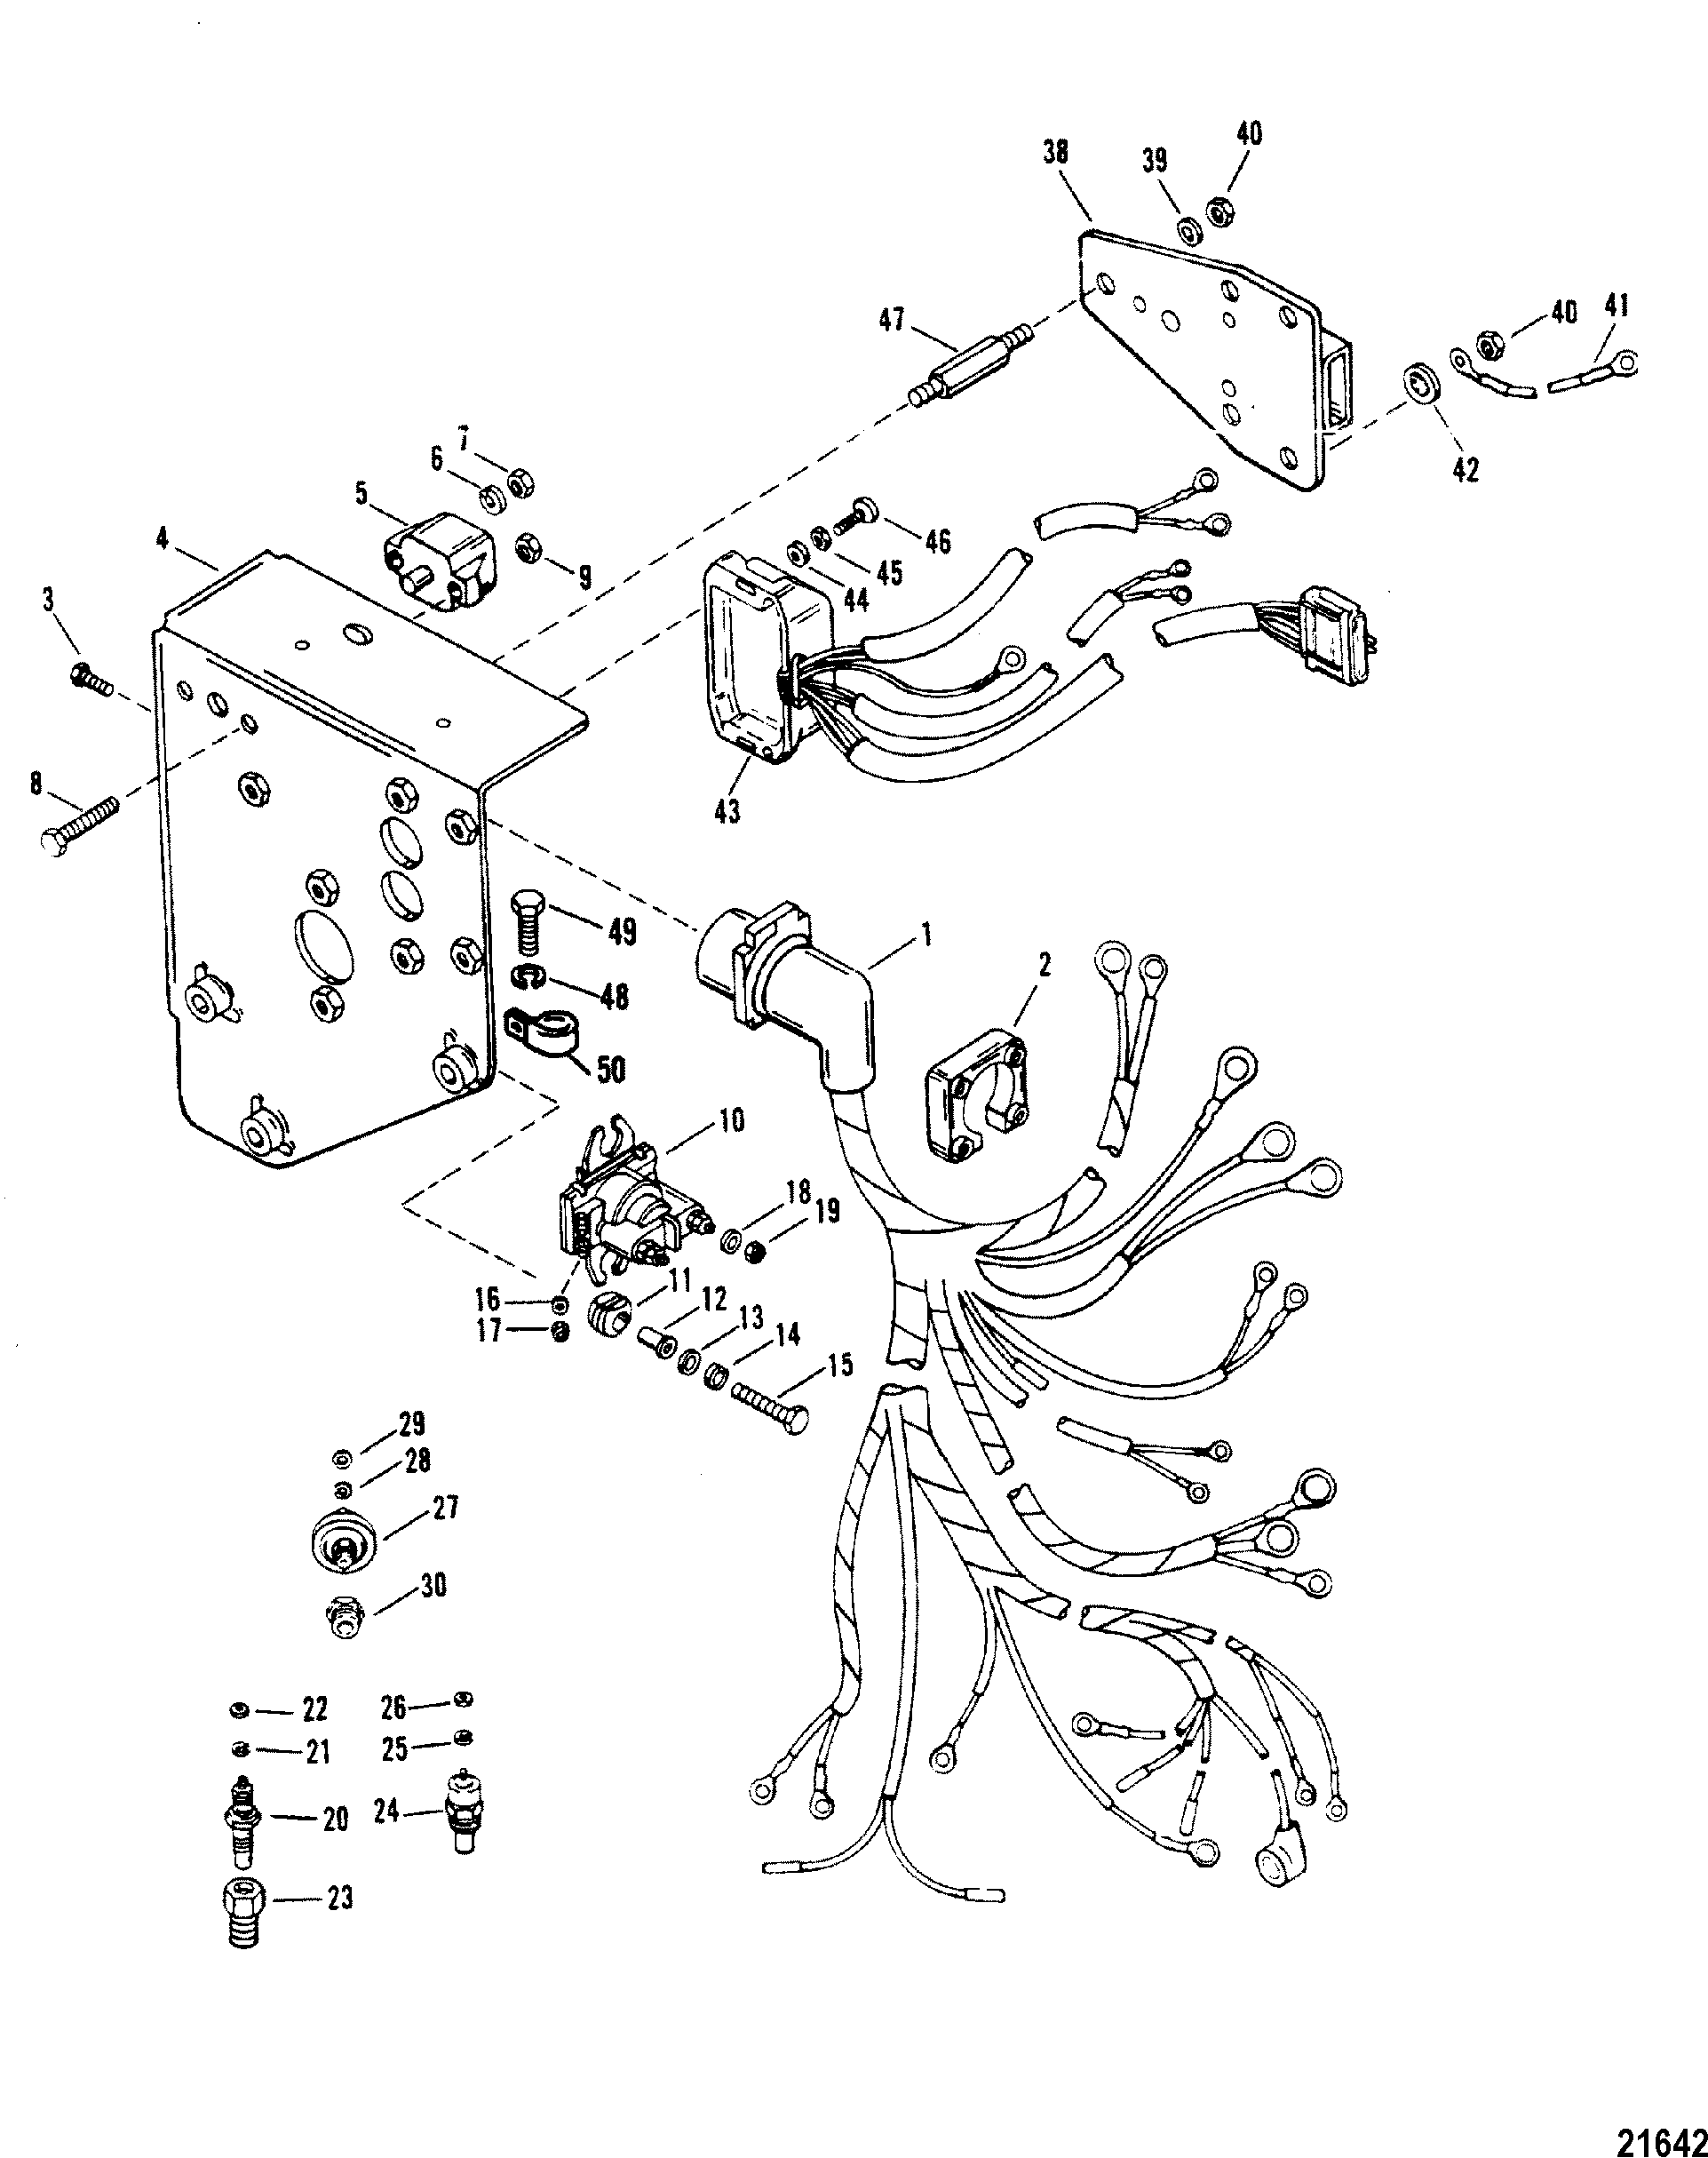 Electrical Components(Serial # 0D763855 Thru 0D937011)